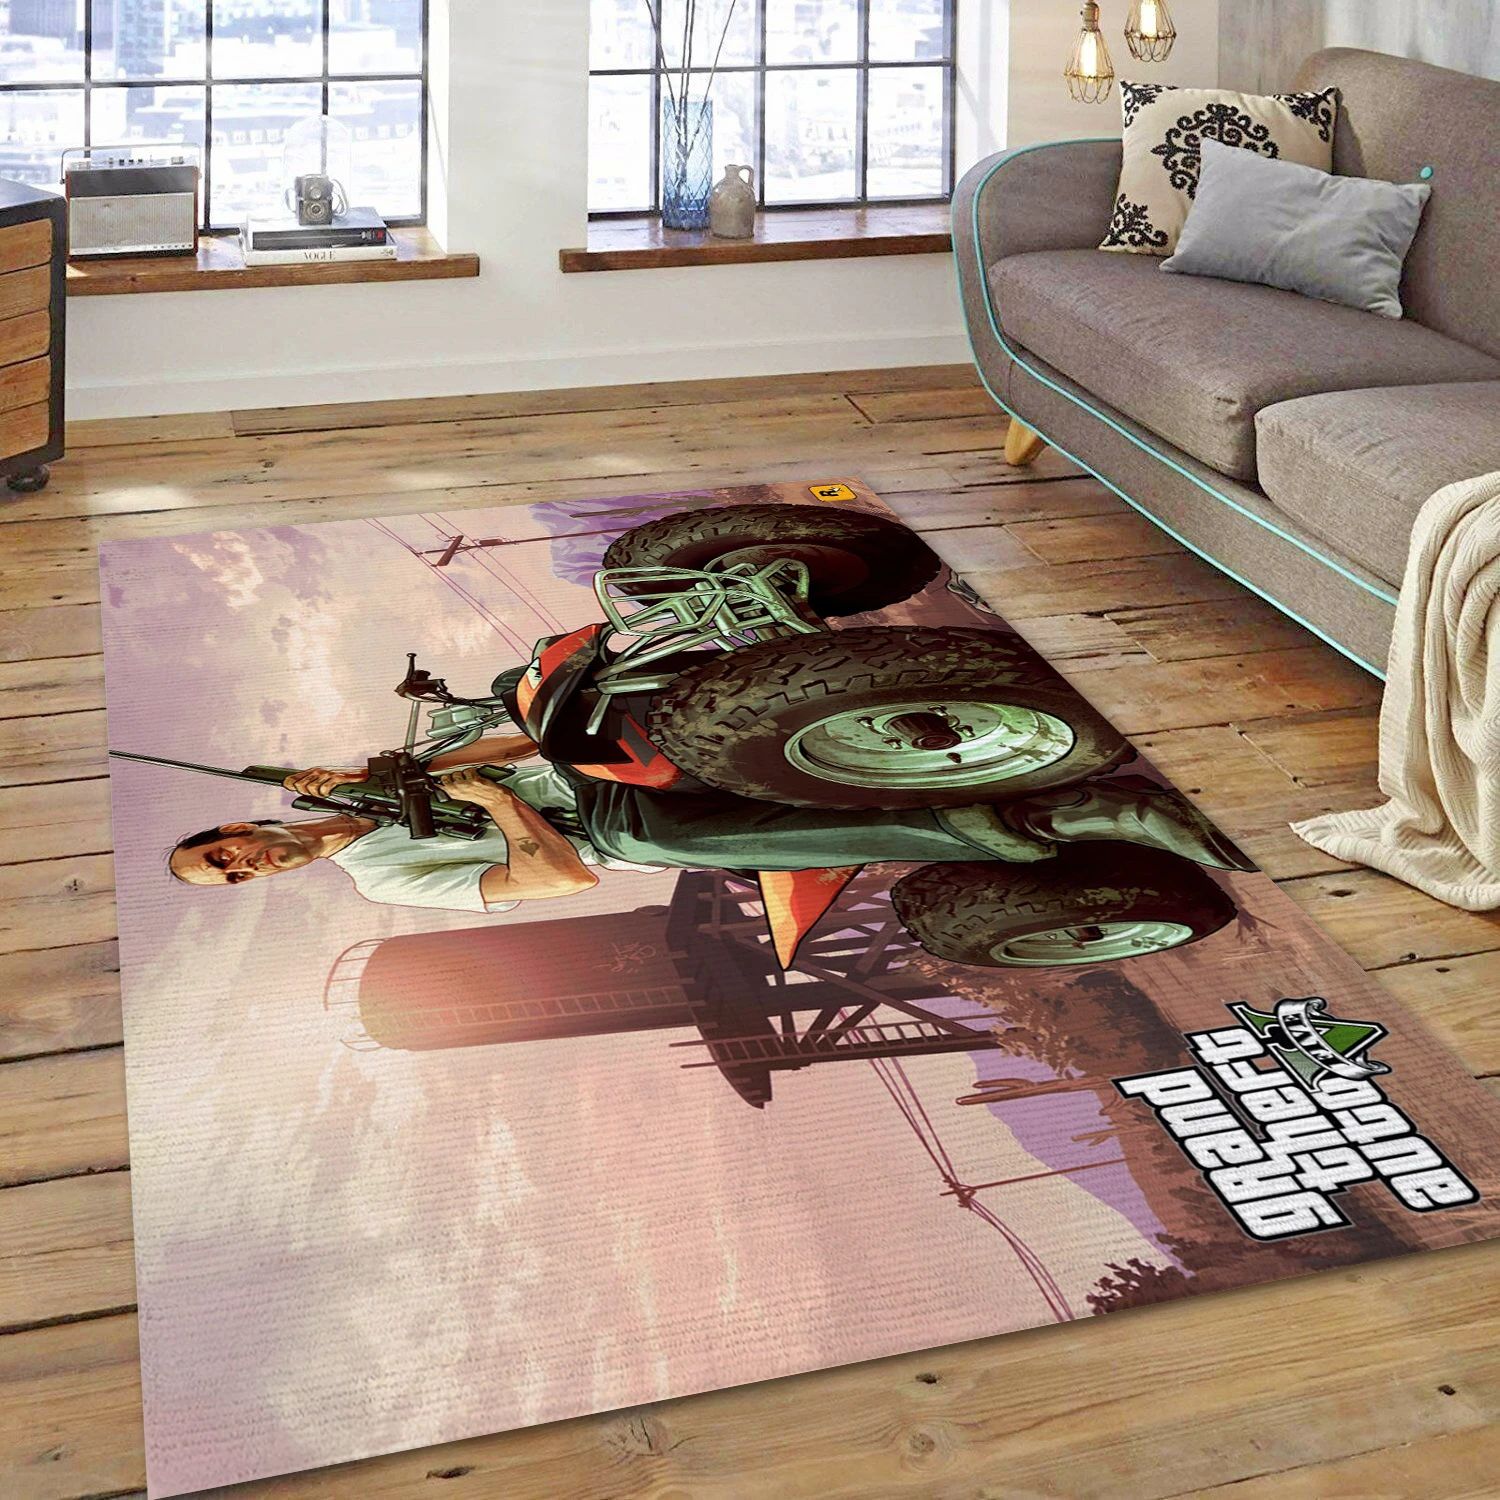 Grand Theft Auto V Video Game Area Rug For Christmas, Bedroom Rug - US Decor - Indoor Outdoor Rugs